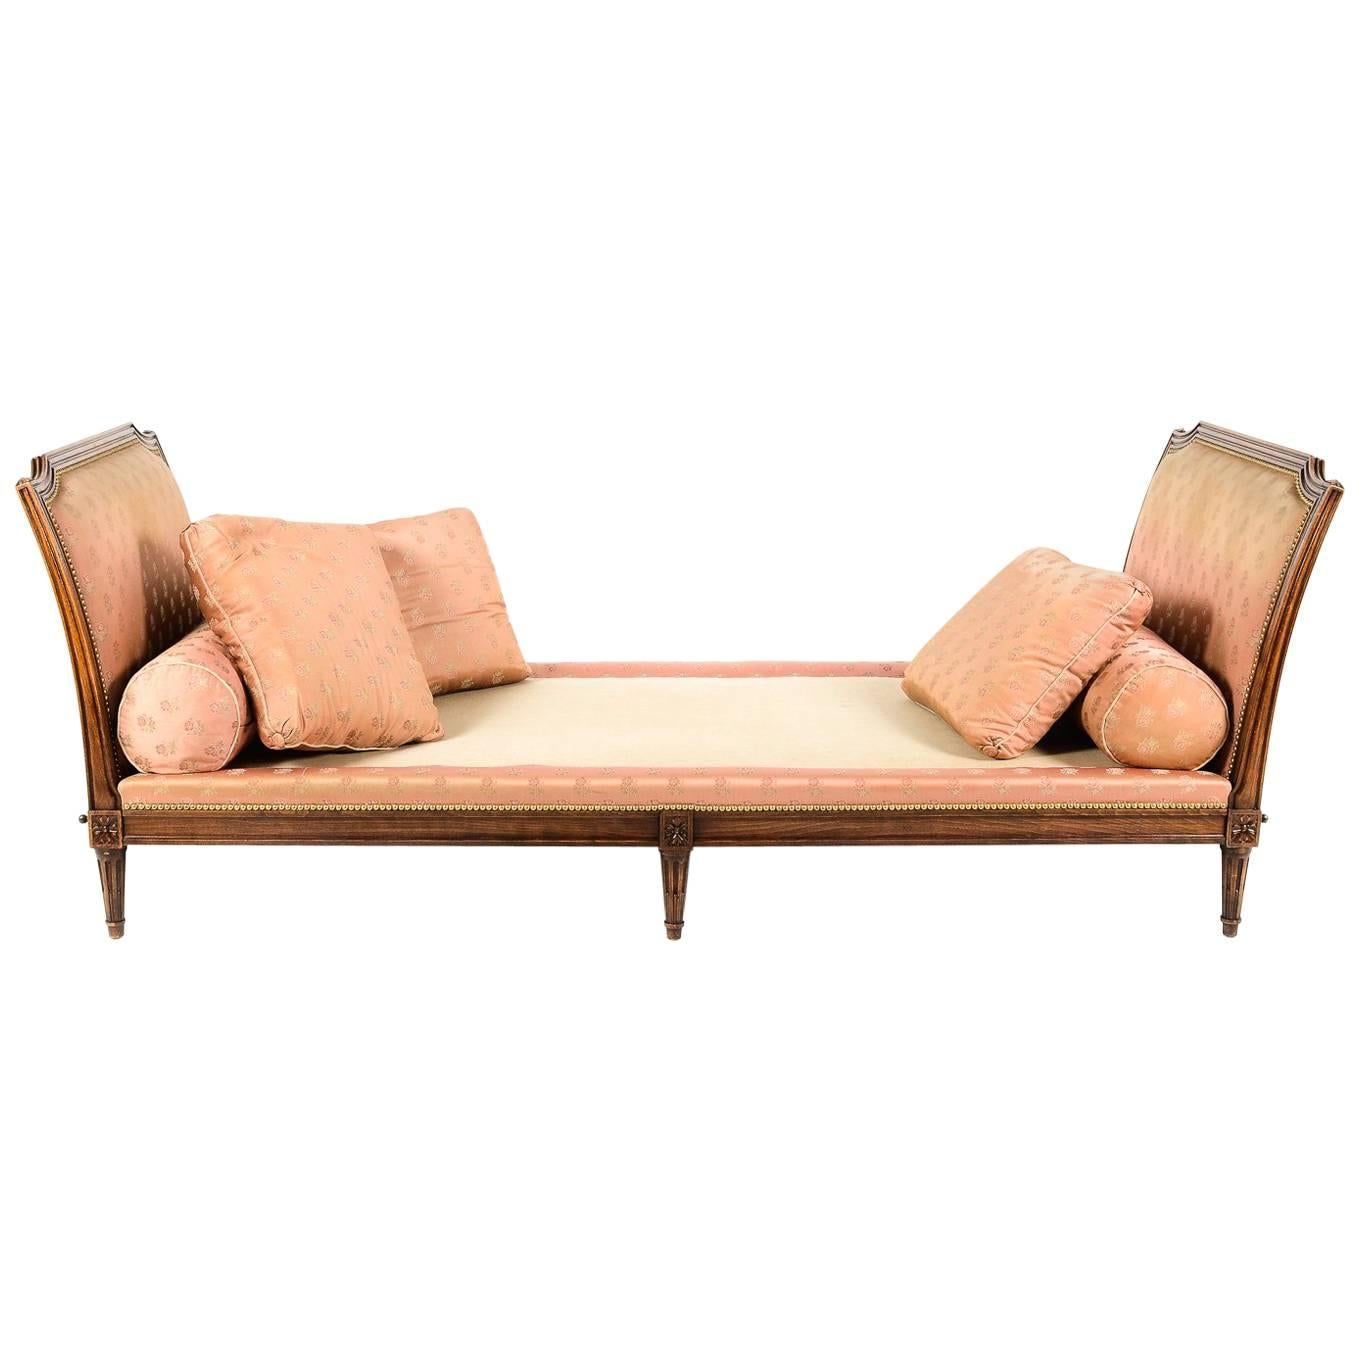 French Walnut Directoire-Style Daybed from Paris, Circa 1920